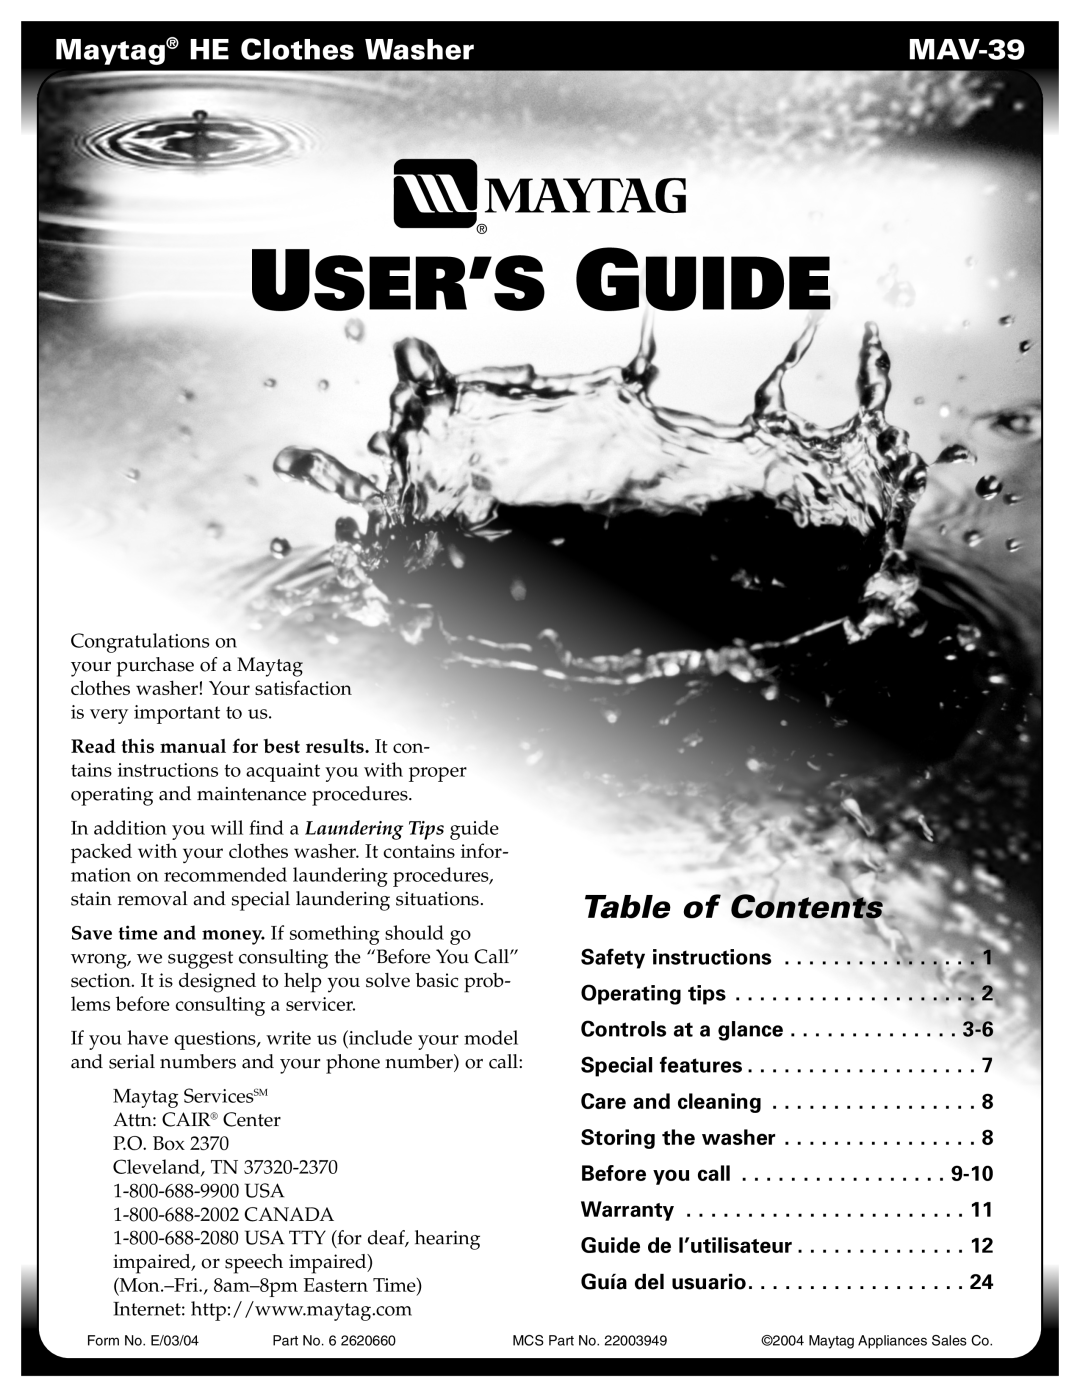 Maytag MAV-39 warranty Table of Contents, Maytag HE Clothes Washer, User’S, Guide 